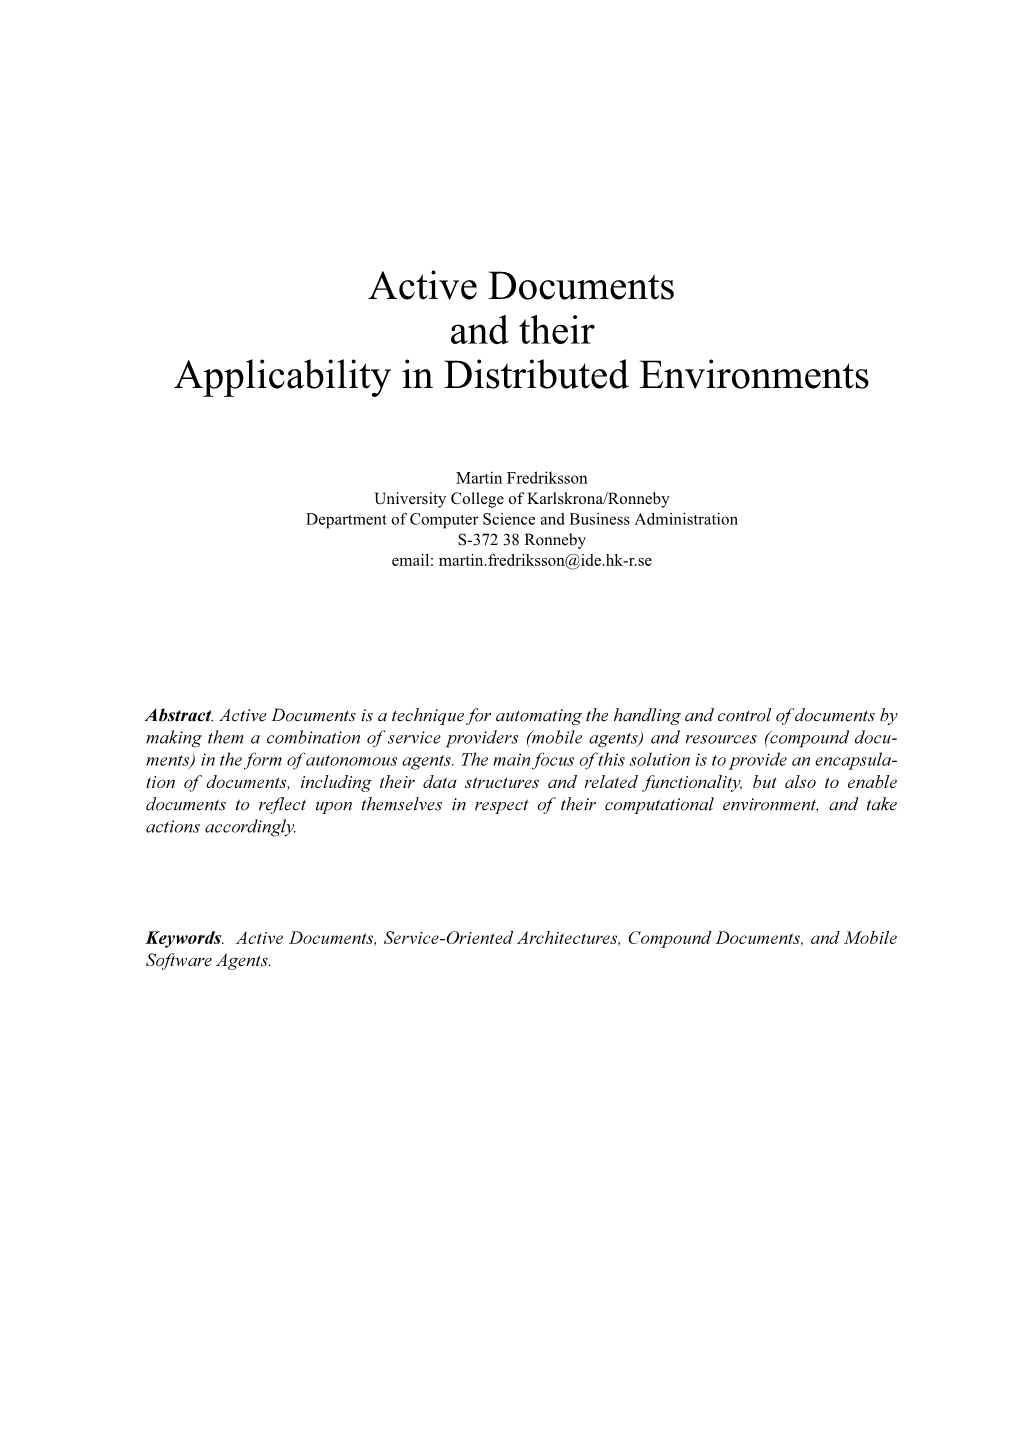 Active Documents and Their Applicability in Distributed Environments